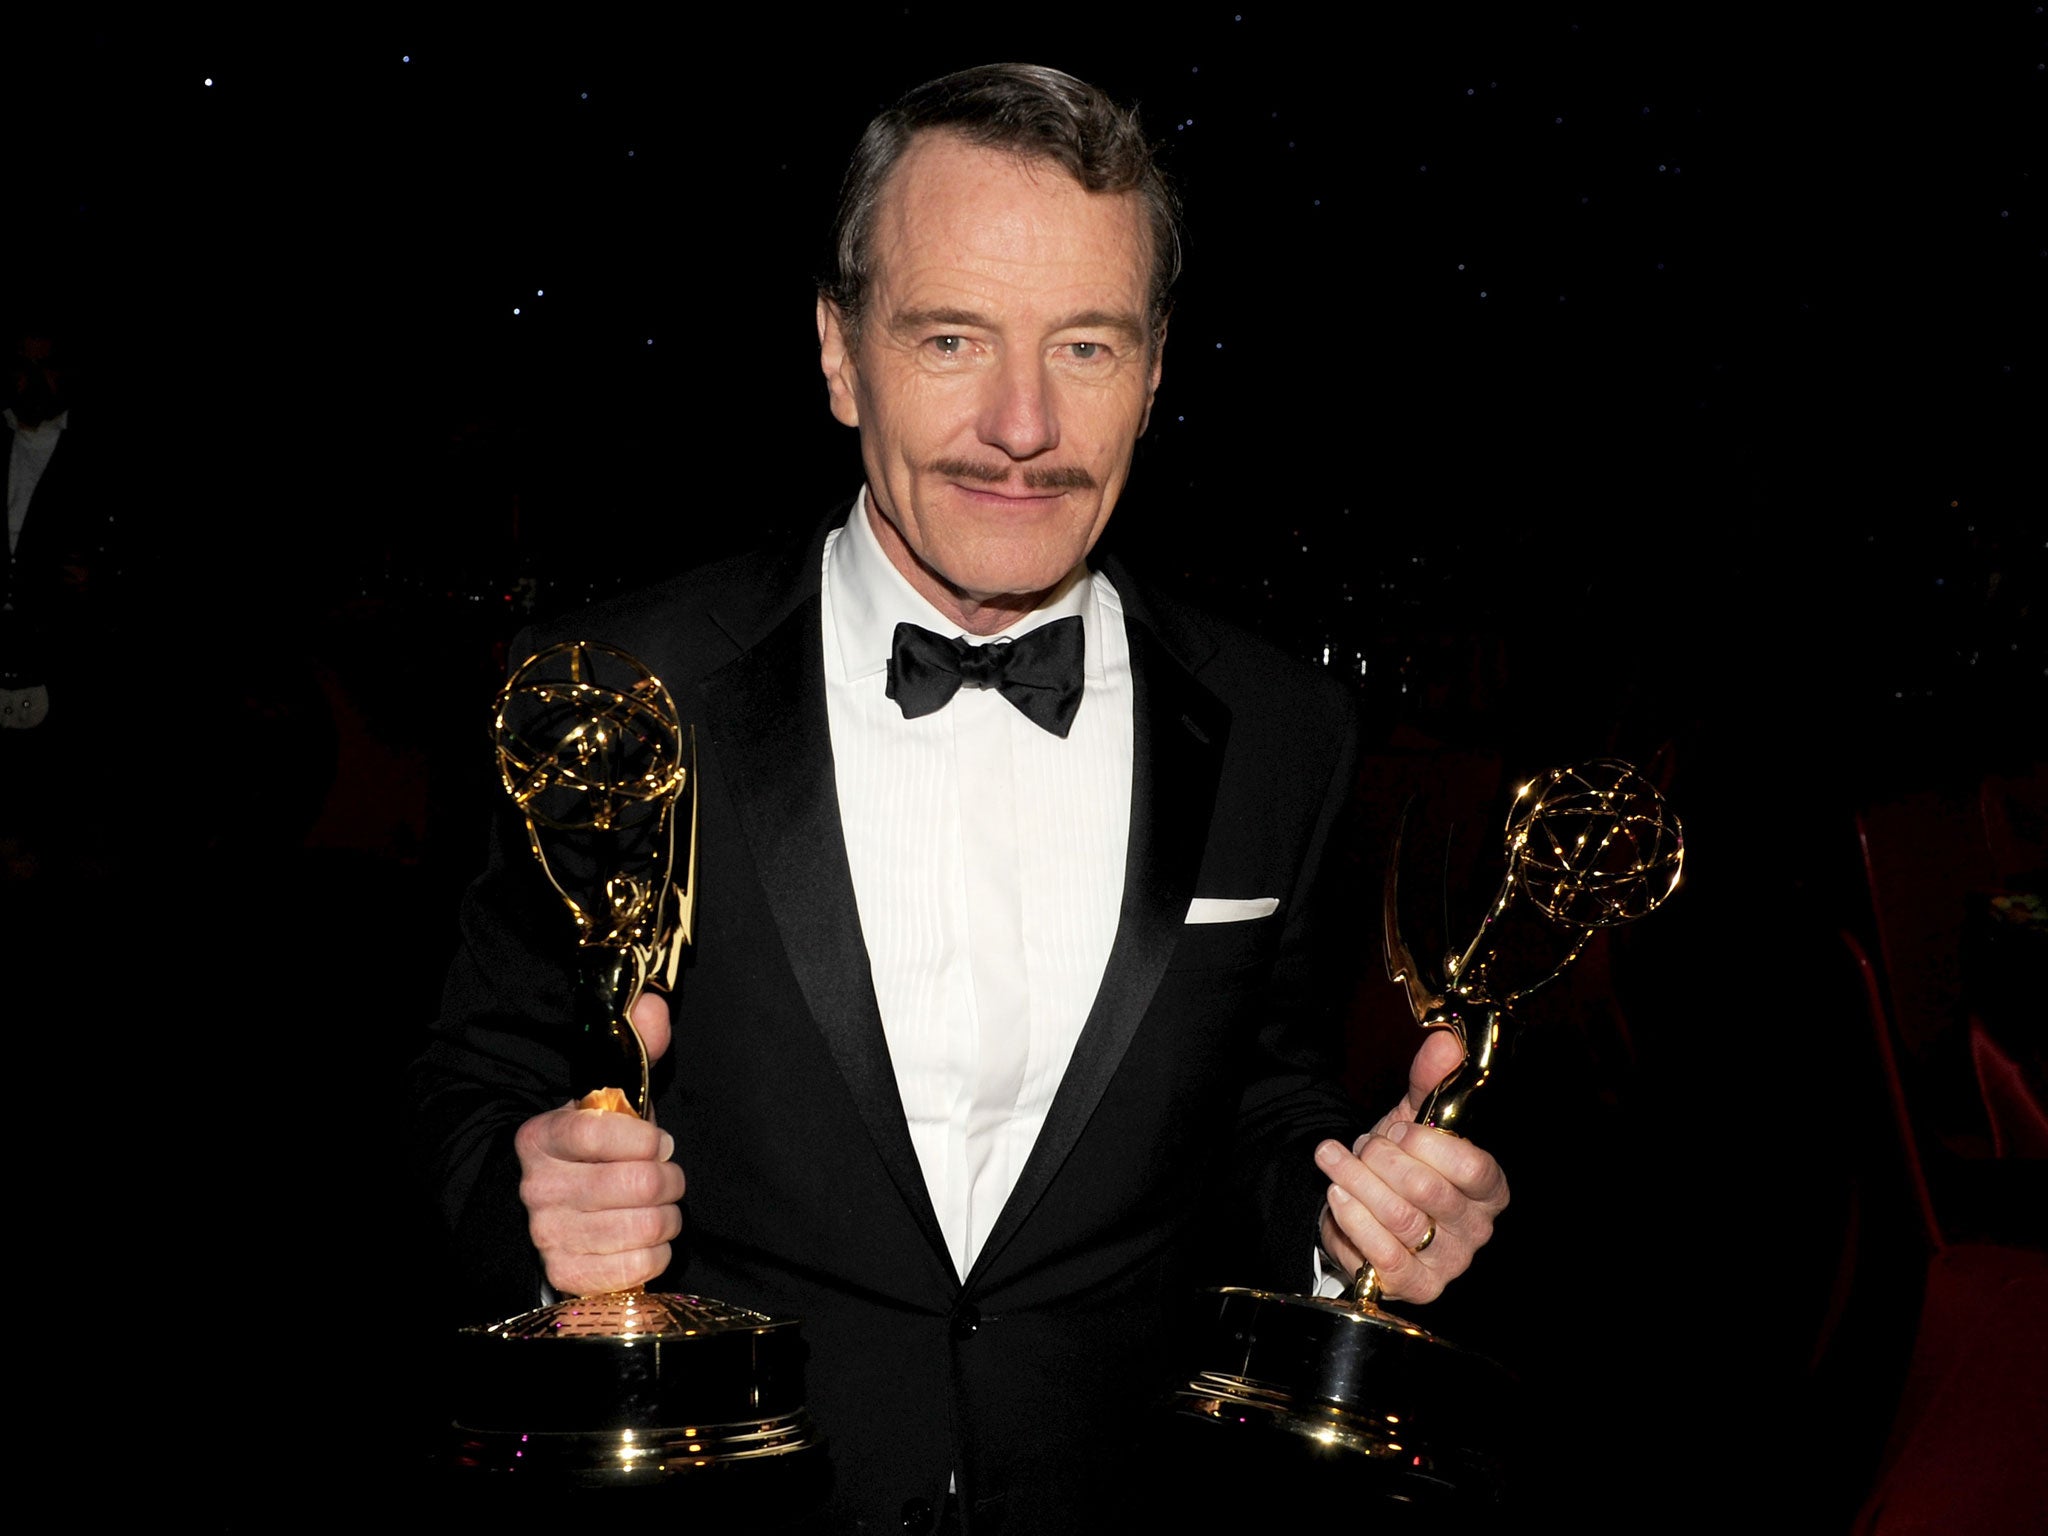 Bryan Cranston will play federal agent Robert Mazur in The Infiltrator